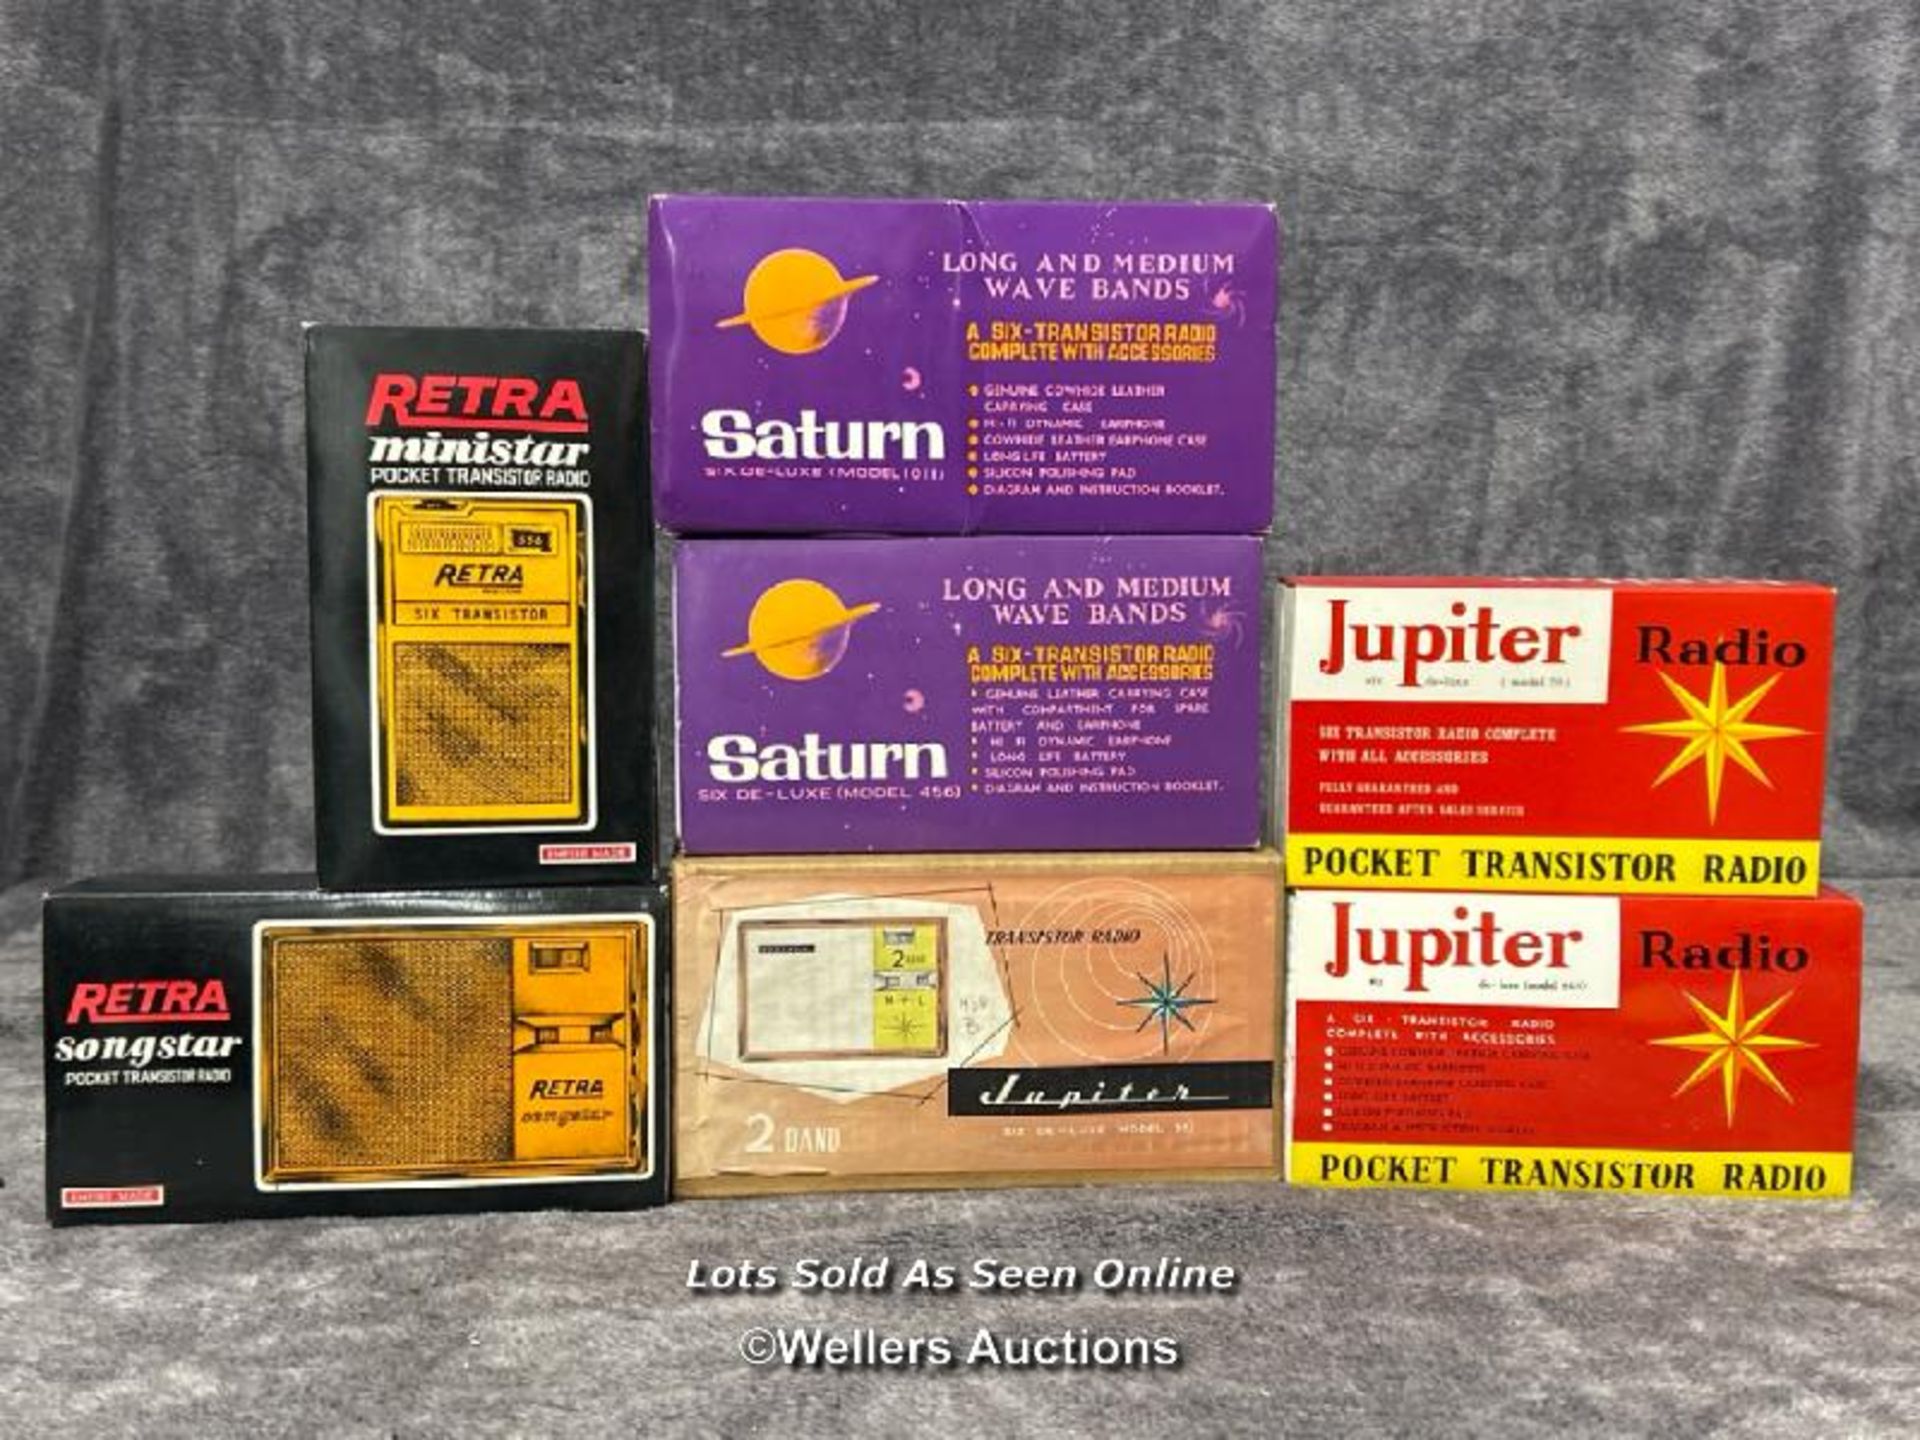 Seven vintage boxed transister radios including Saturn, Jupiter and Retra, from the private